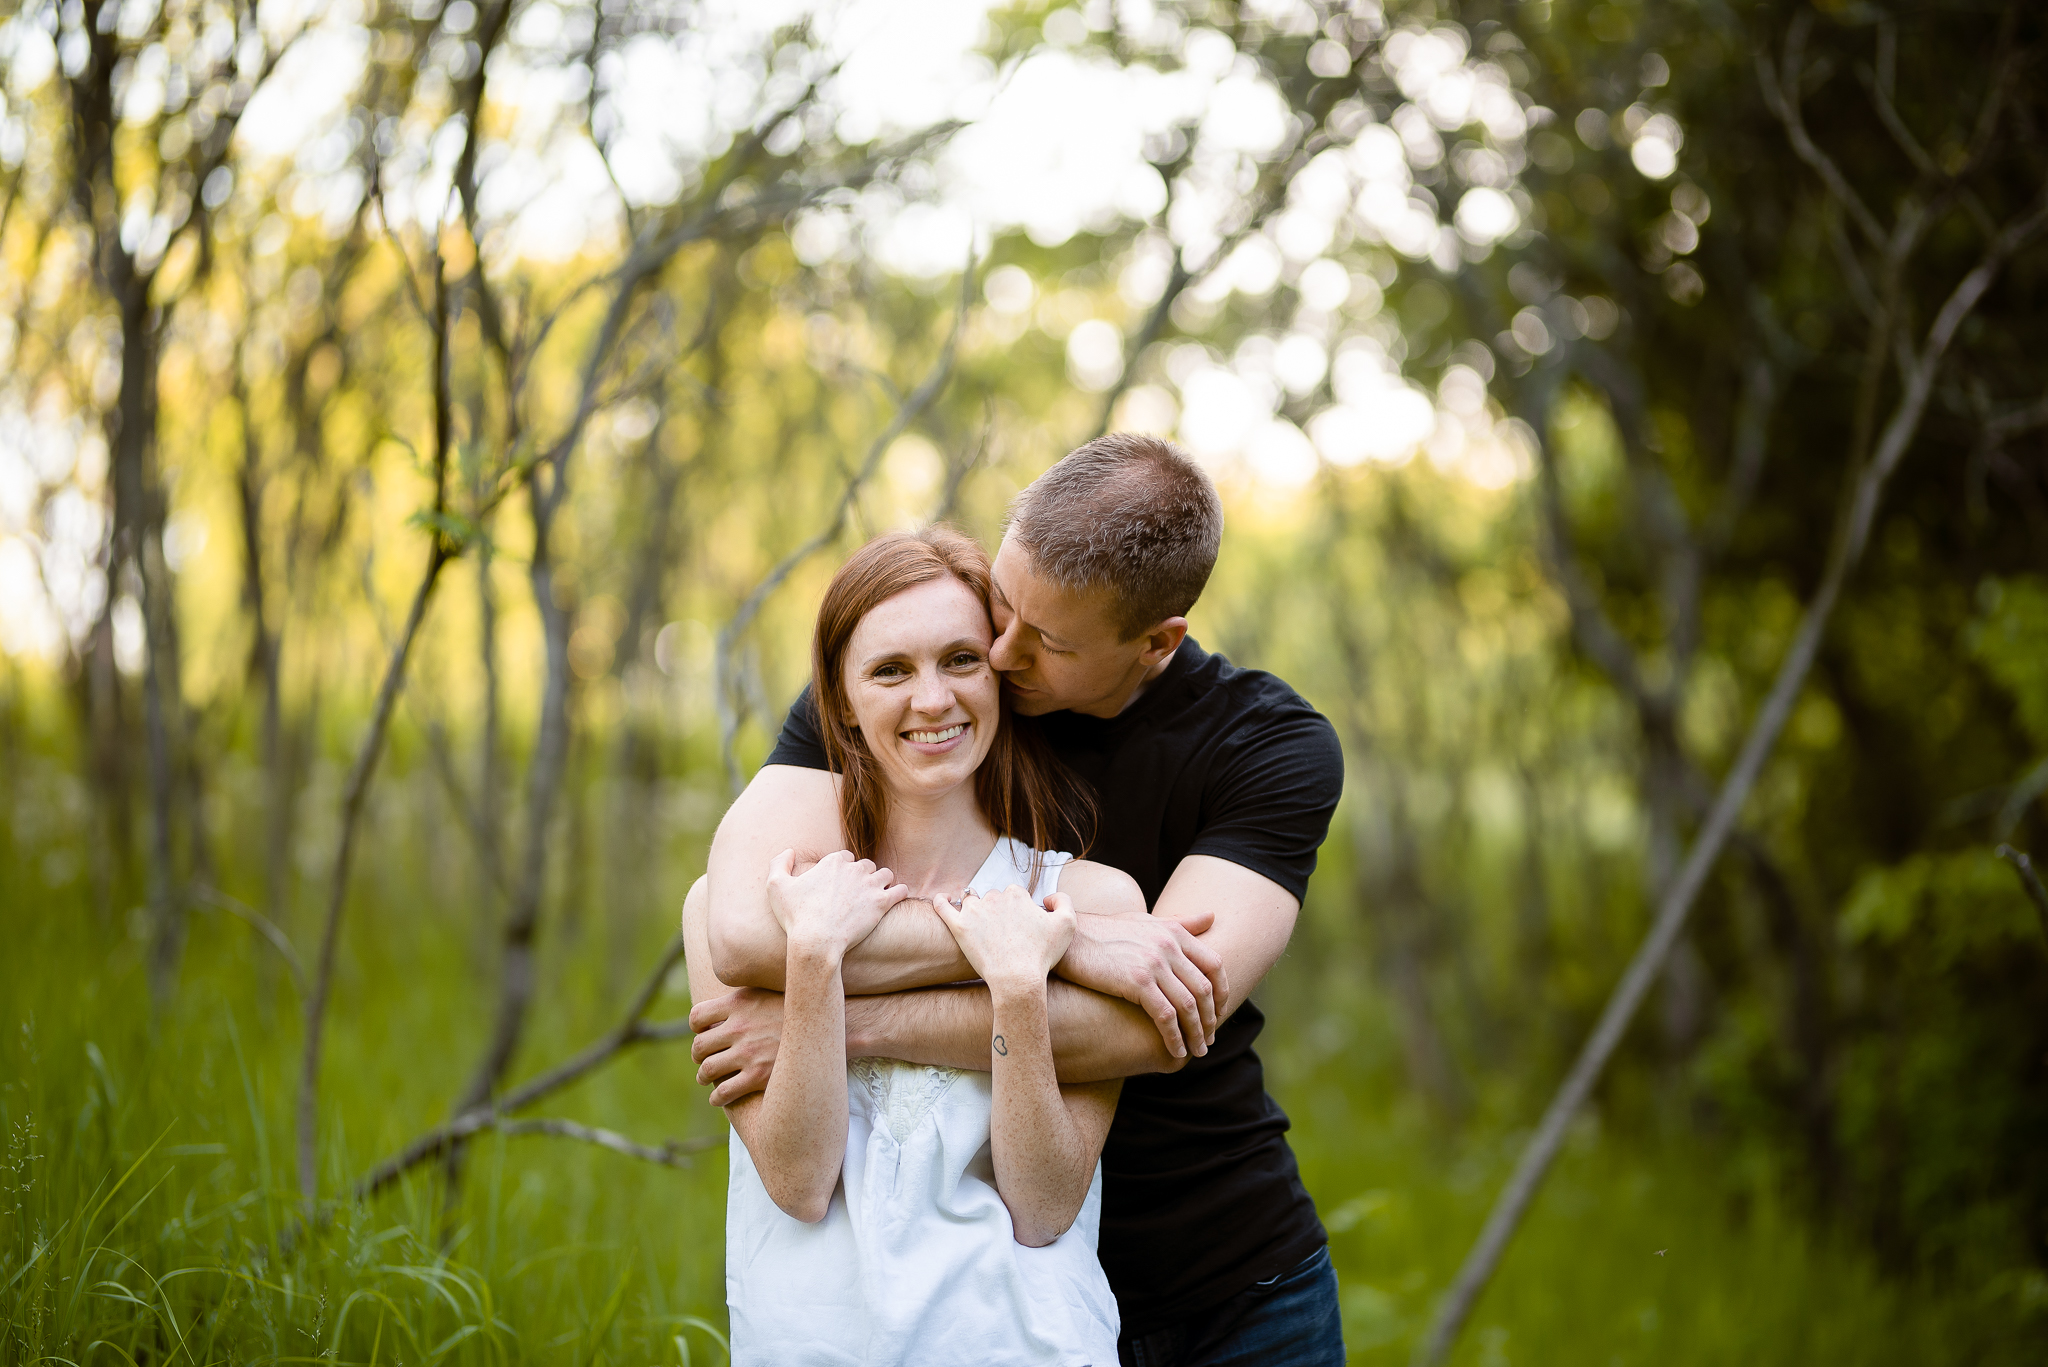 Couples164NaomiLuciennePhotography062019-4-Edit.jpg